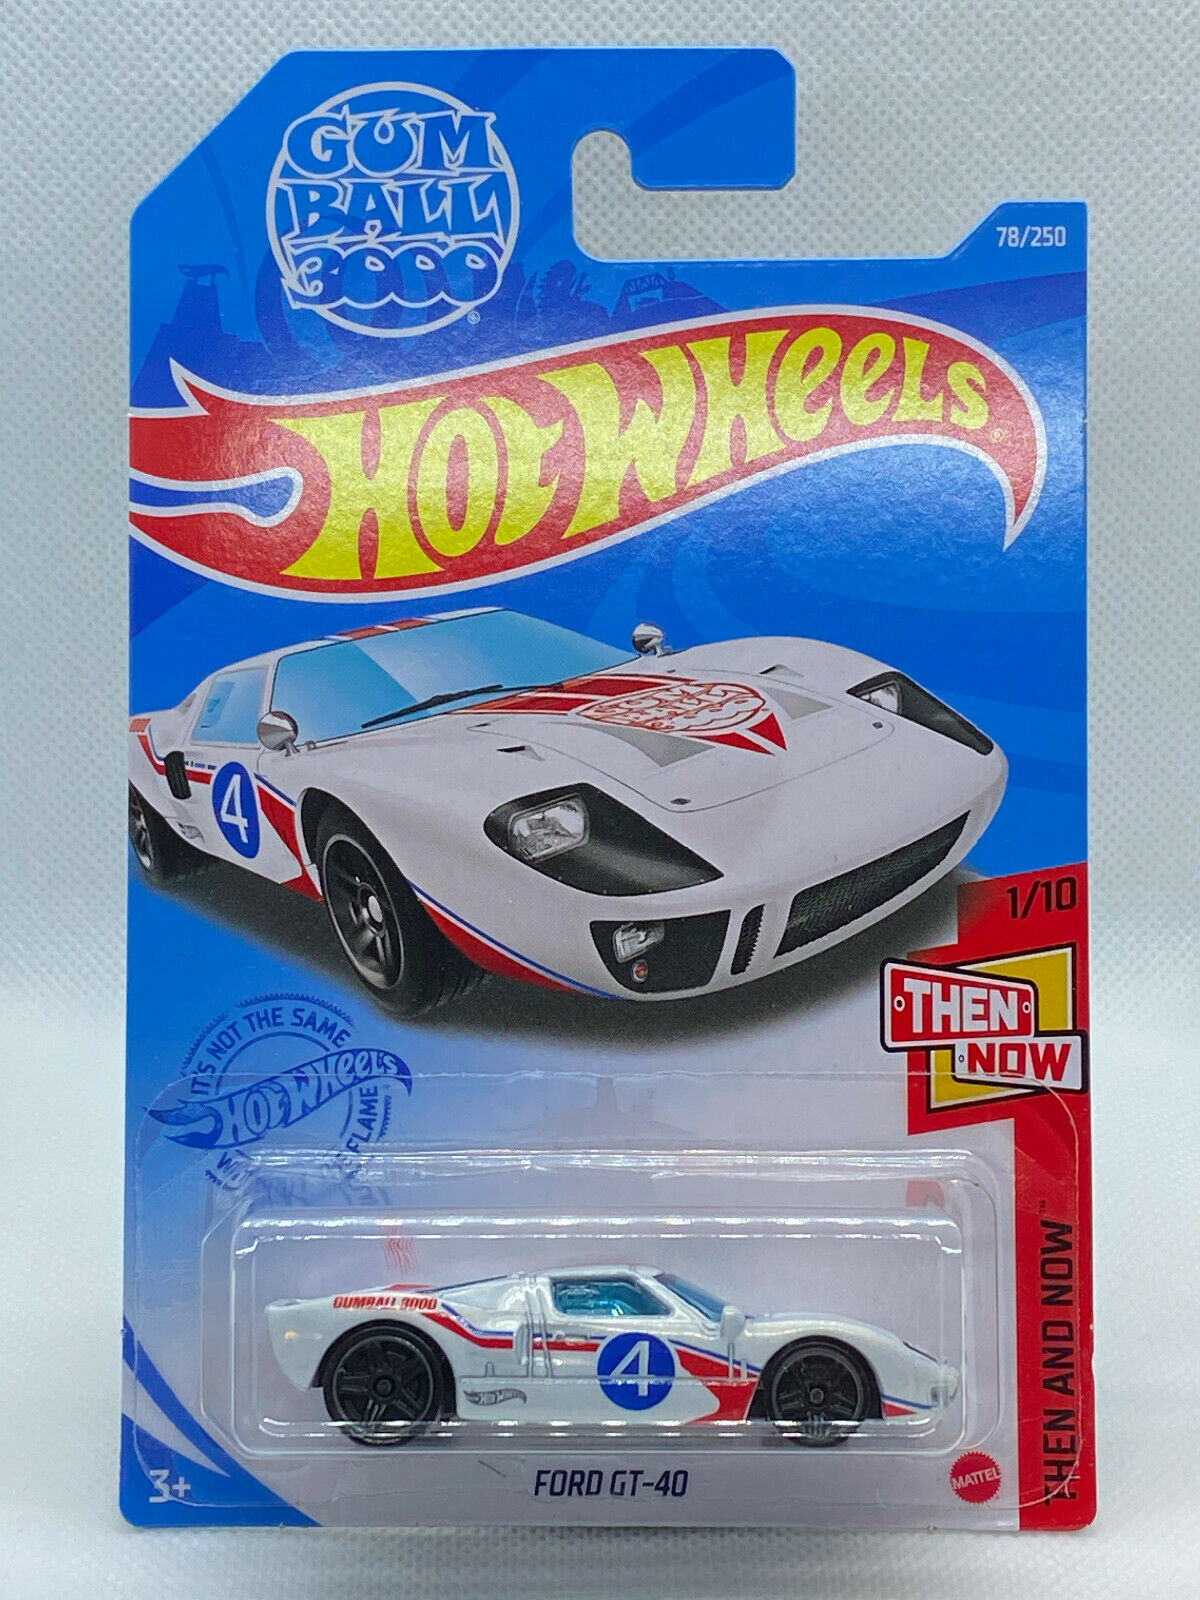 2021 Hot Wheels Then and Now #1/10 Ford GT40 Gumball 3000 #78/250 NIP